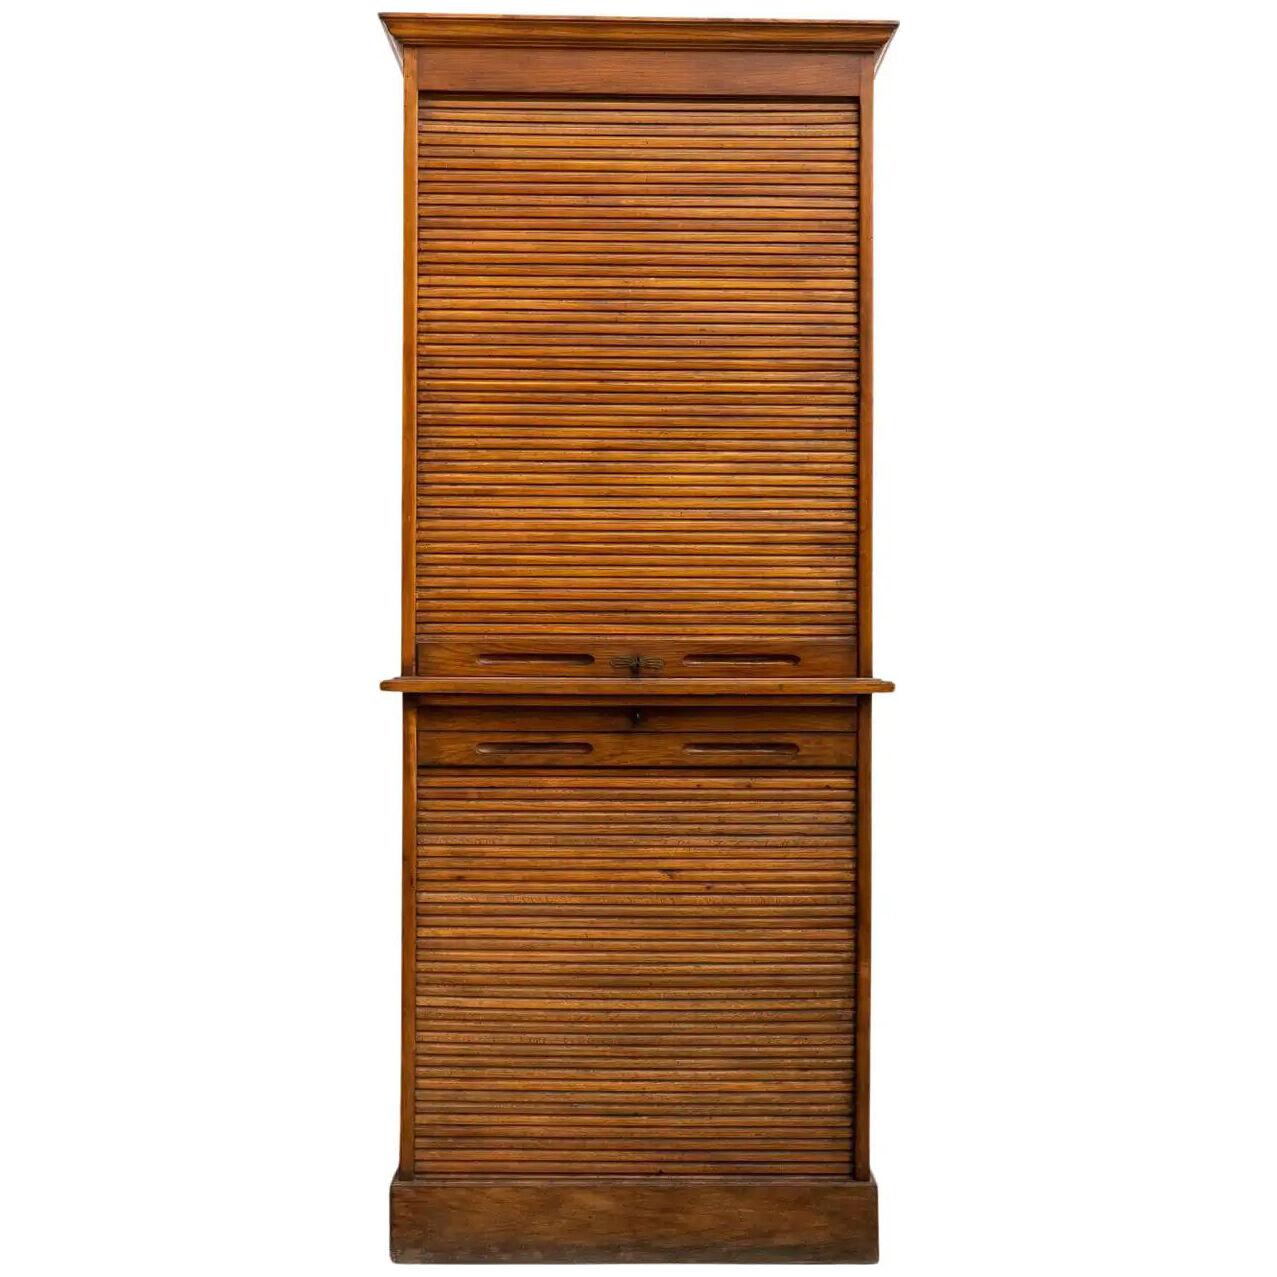 Early 20th Century Filing Cabinet with Two Louvers Doors